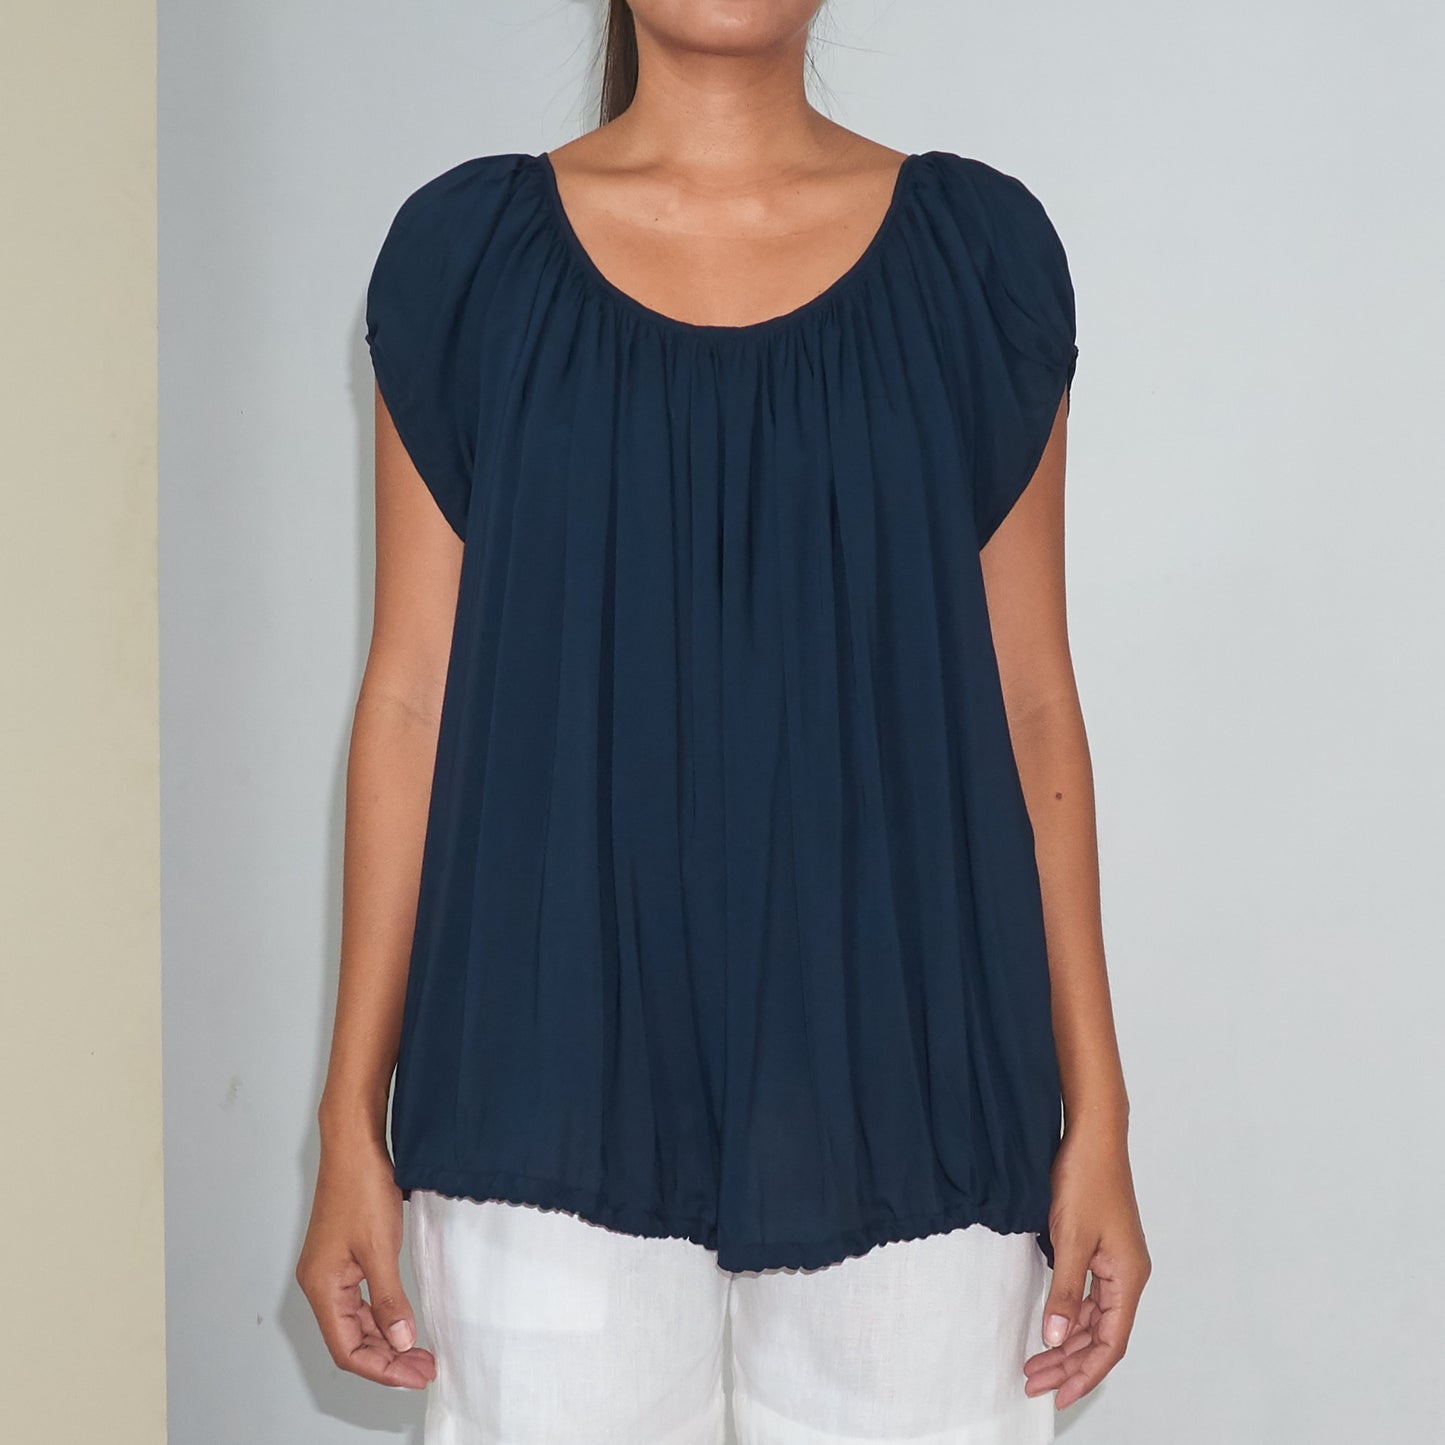 U-FLOW TOP - Rayon Voile | Midnight Blue